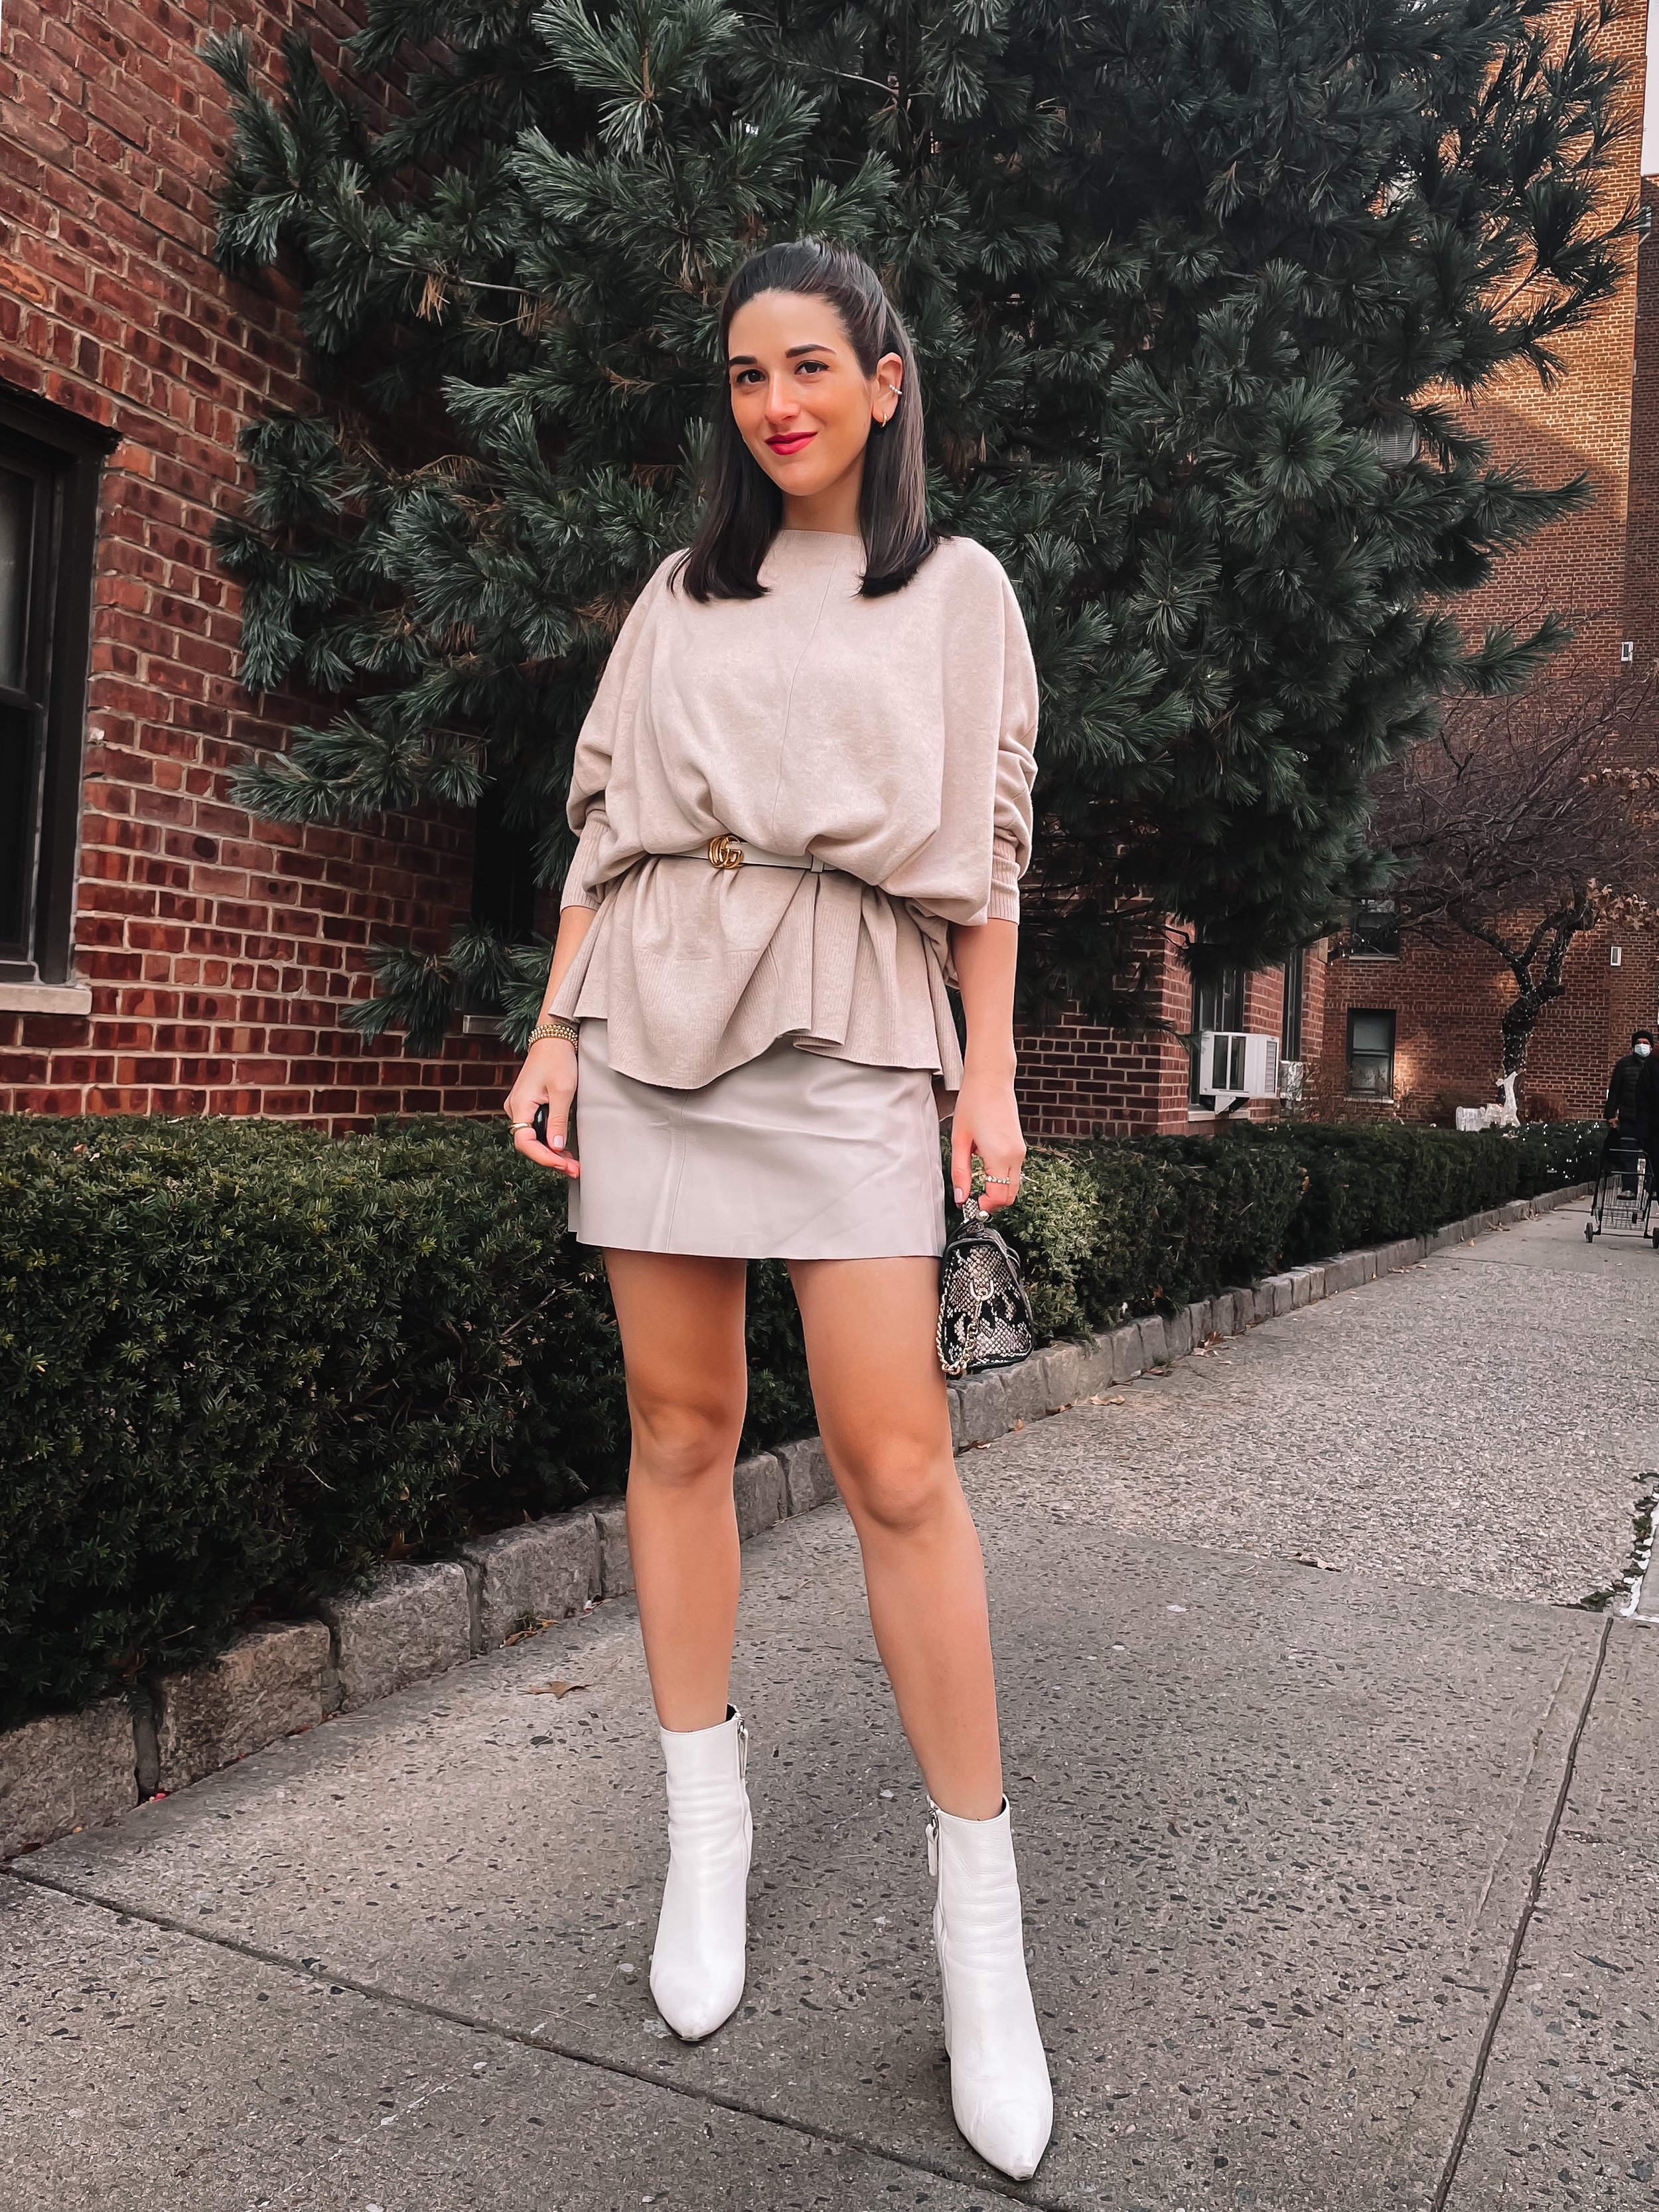 My First Outfit  Postpartum :: Monochrome Beige Look + White Booties Esther Santer NYC Street Style Lifestyle Blogger Motherhood First Time Mom Outfits .jpg